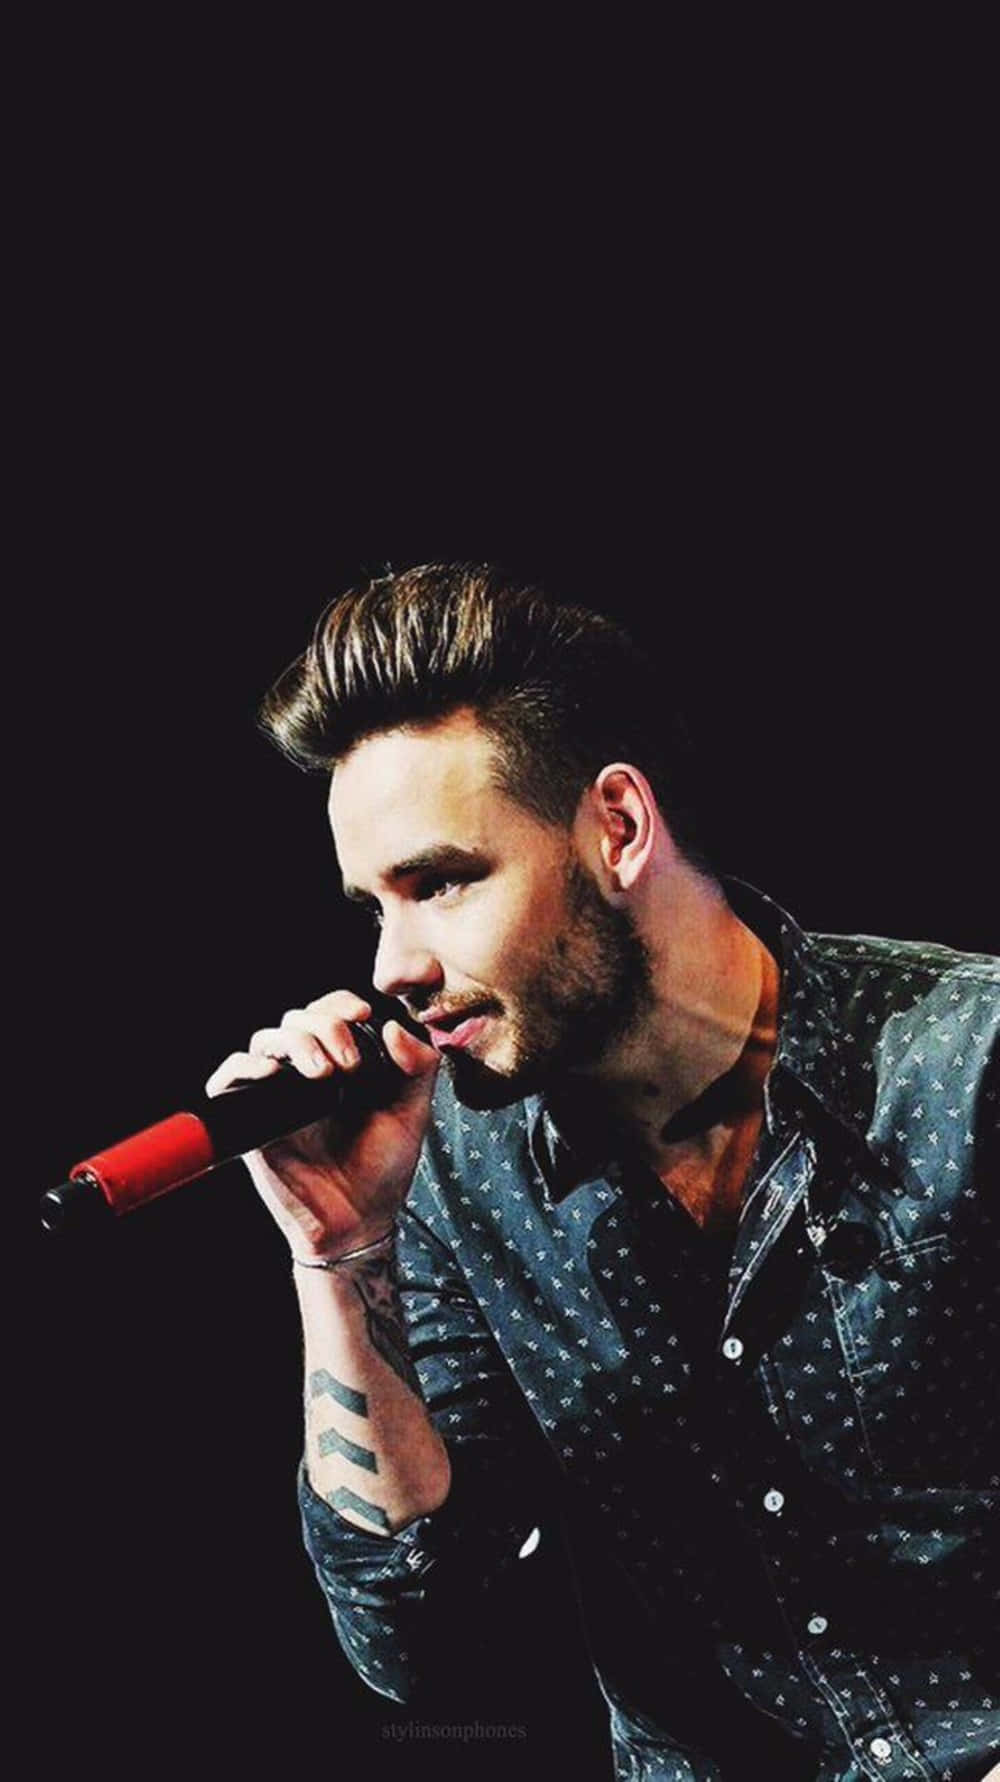 Liam Payne Rocks The Stage With His Electrifying Performance. Background